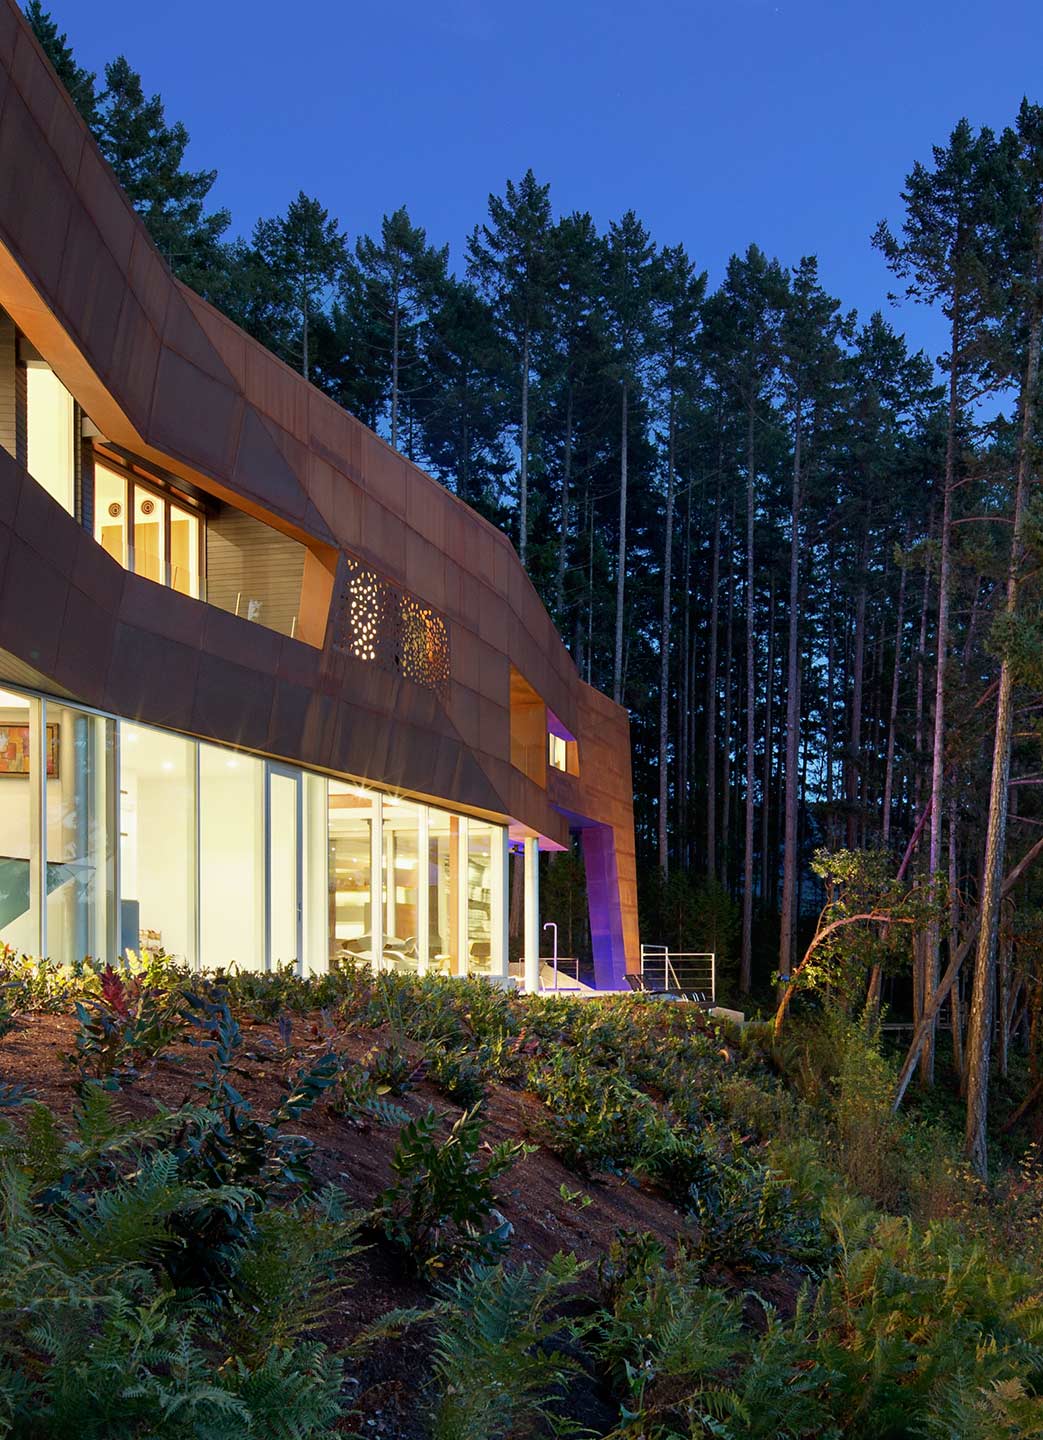 Detail of the facade design, Gulf Islands Residence designed by Tony Robins of AA Robins architects.